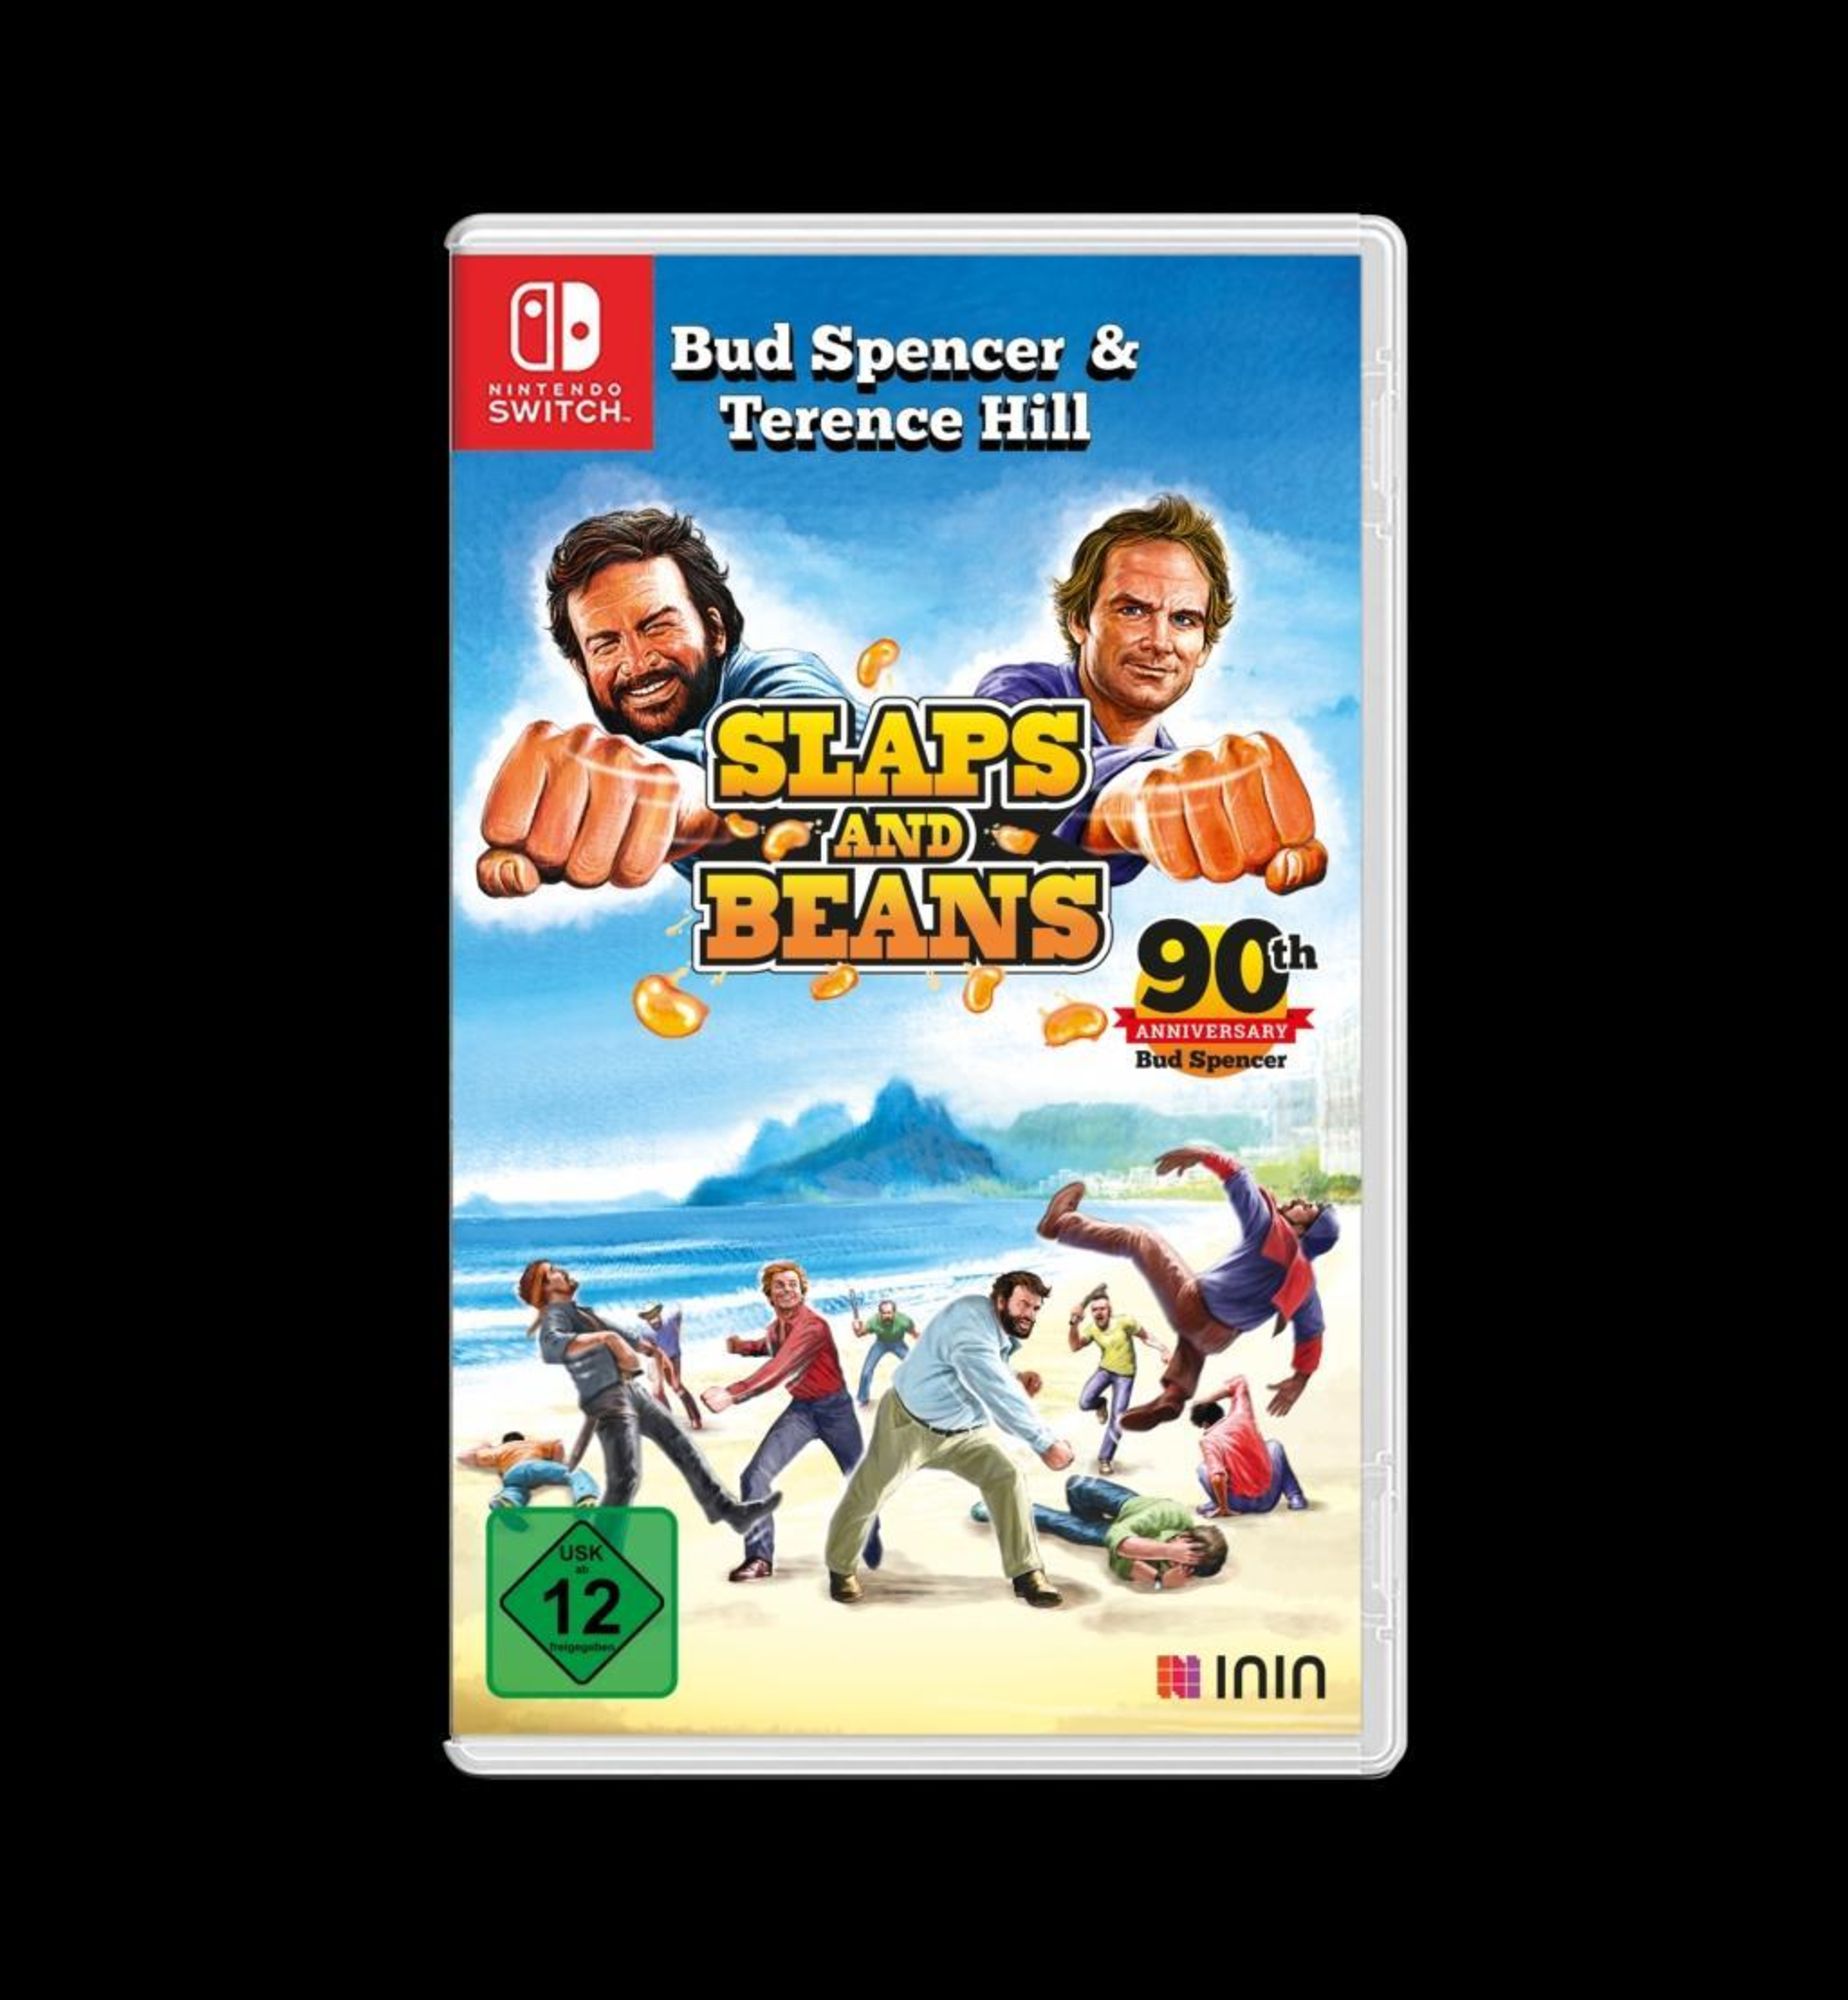 für Beans\' - & and Bud Spencer Slaps kaufen \'Nintendo Terence Hill Switch\'